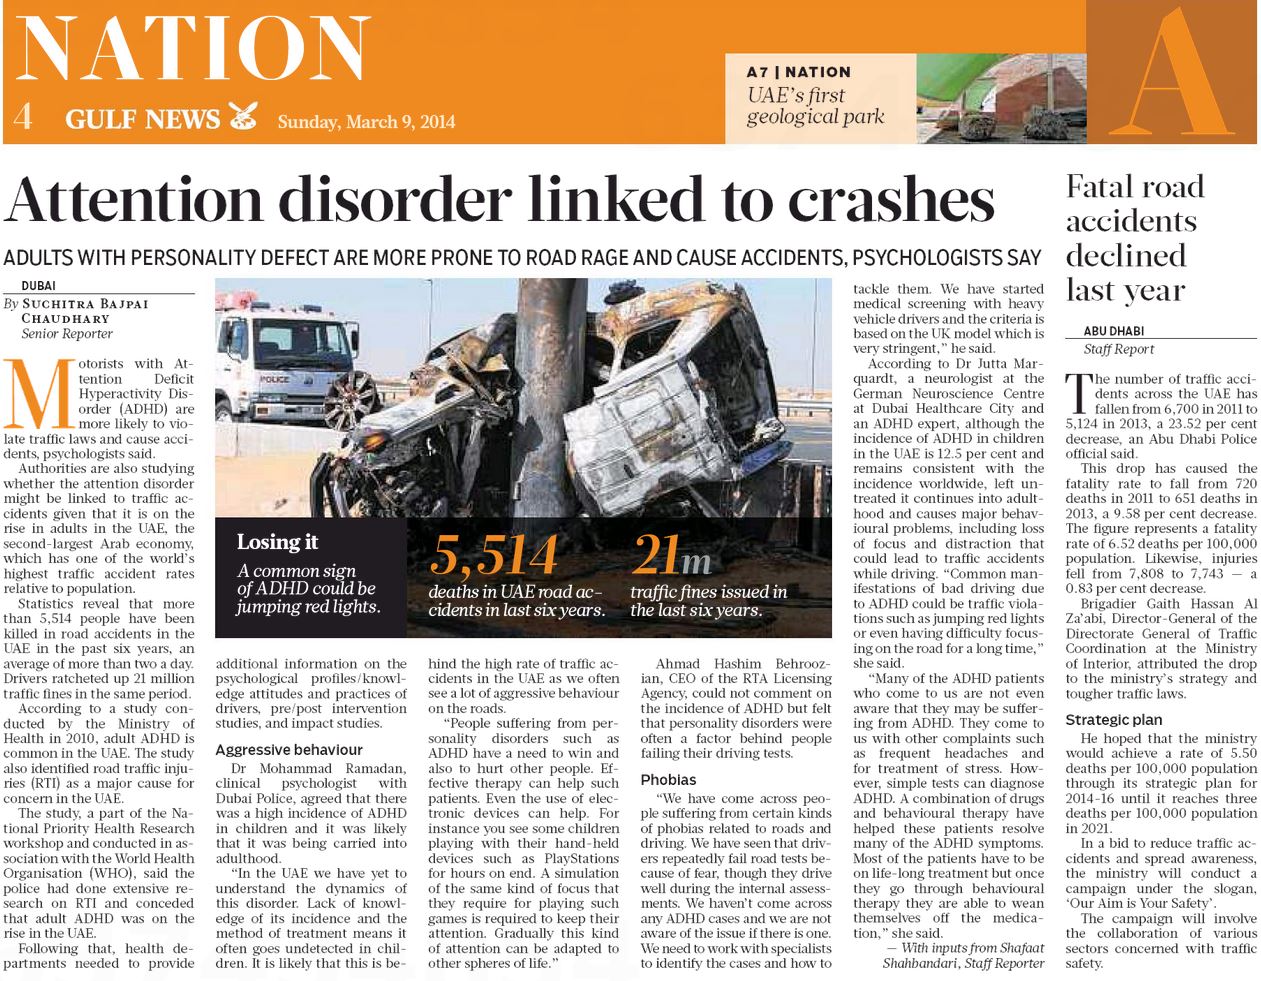 Gulf News: ADHD blamed for bad driving in the UAE